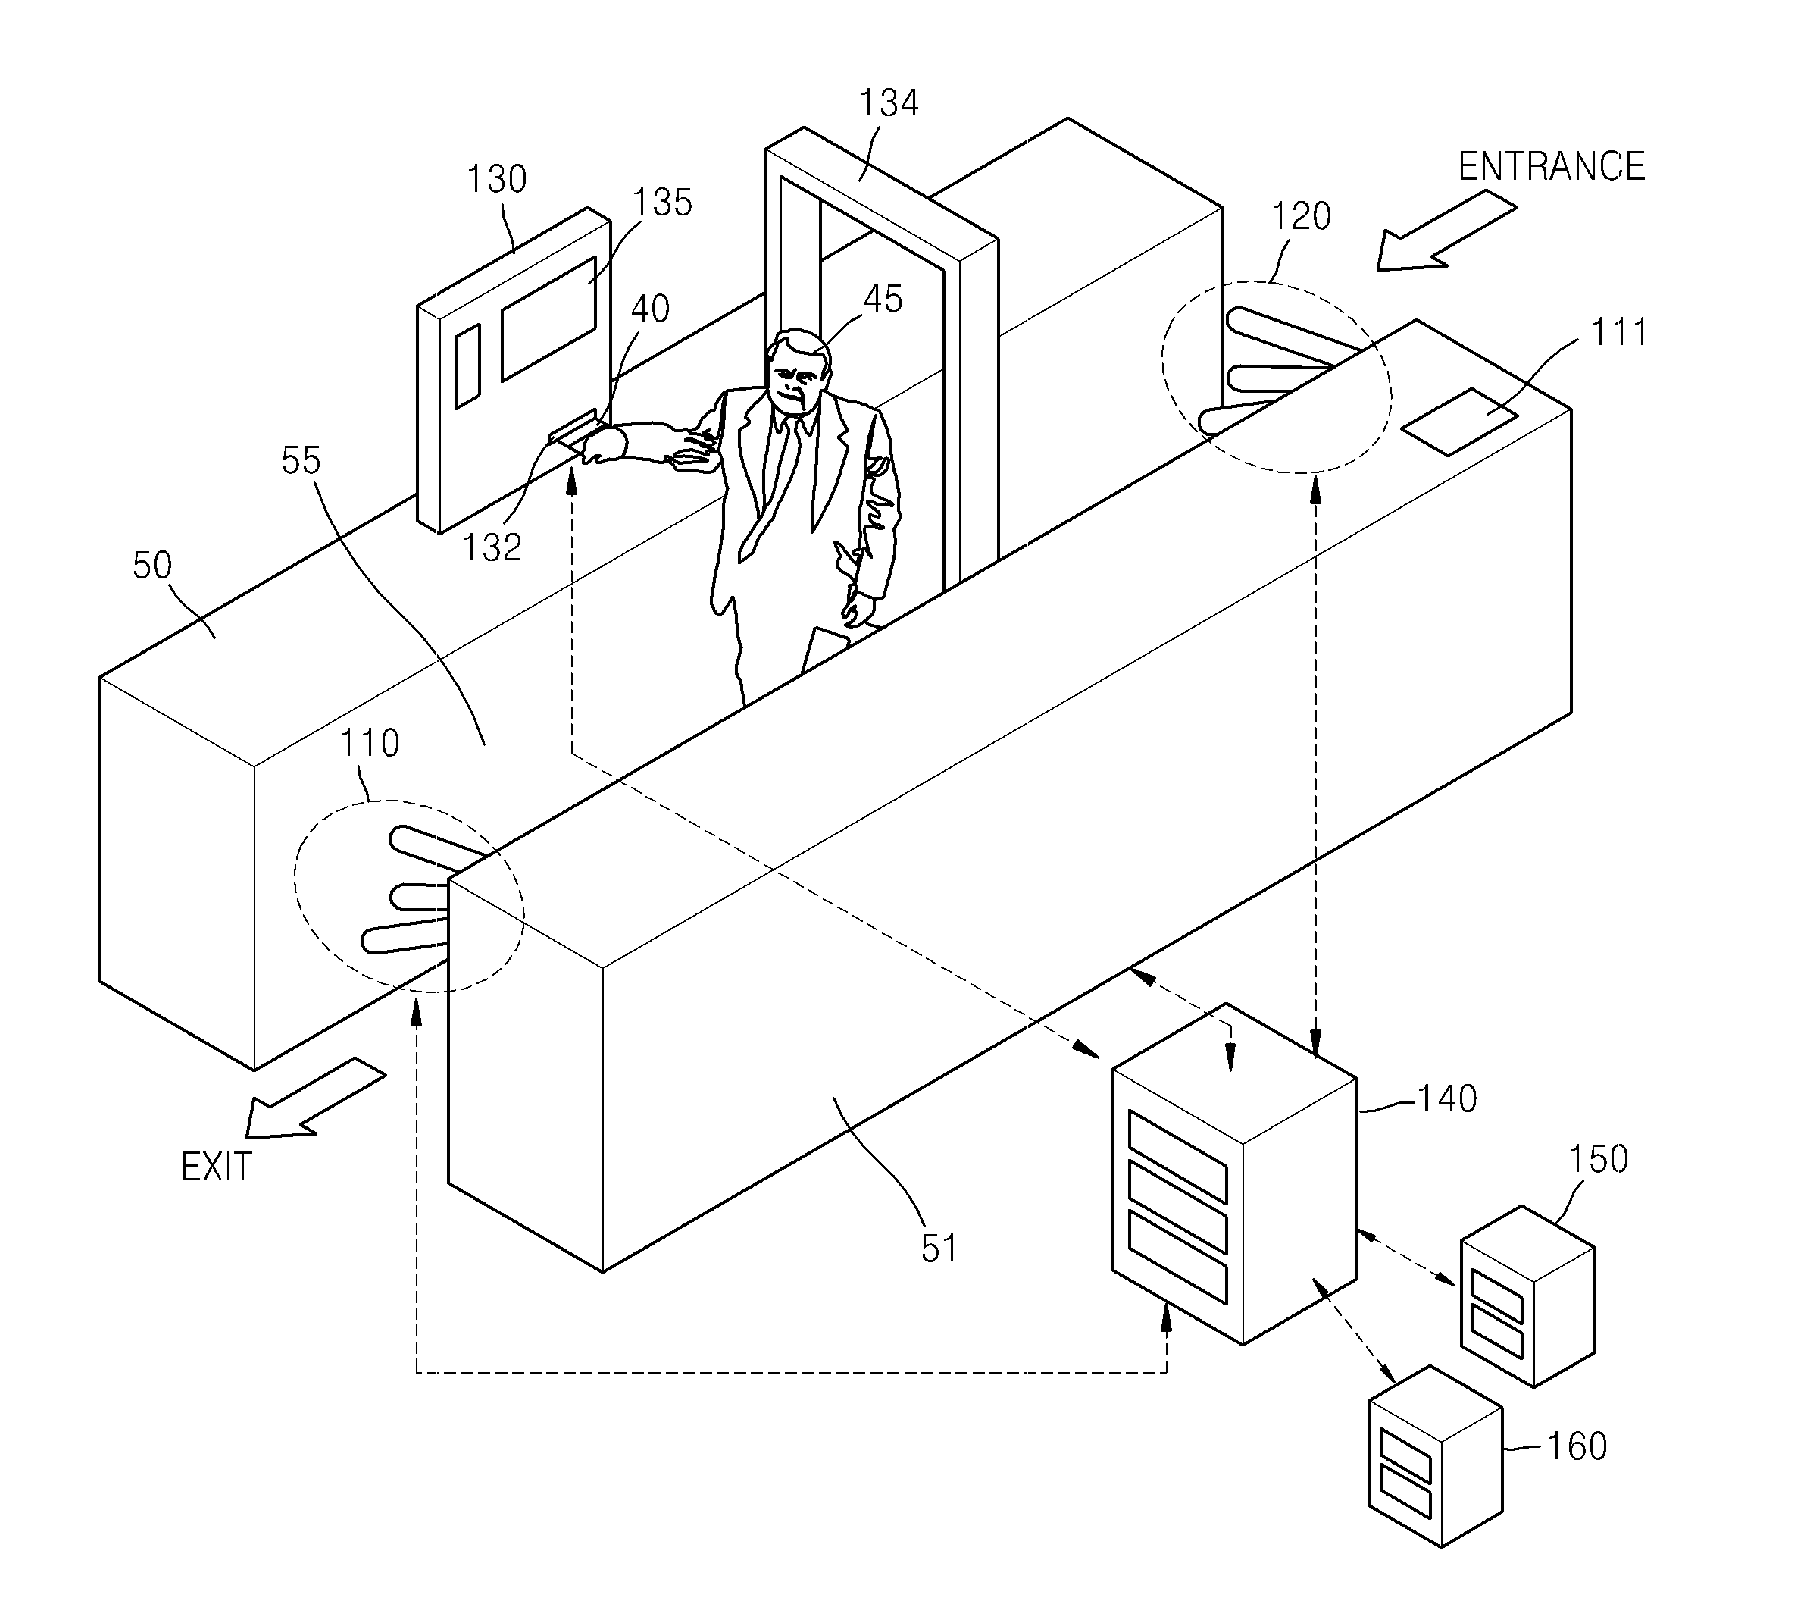 Apparatus and method of automating arrival and departure procedures in airport